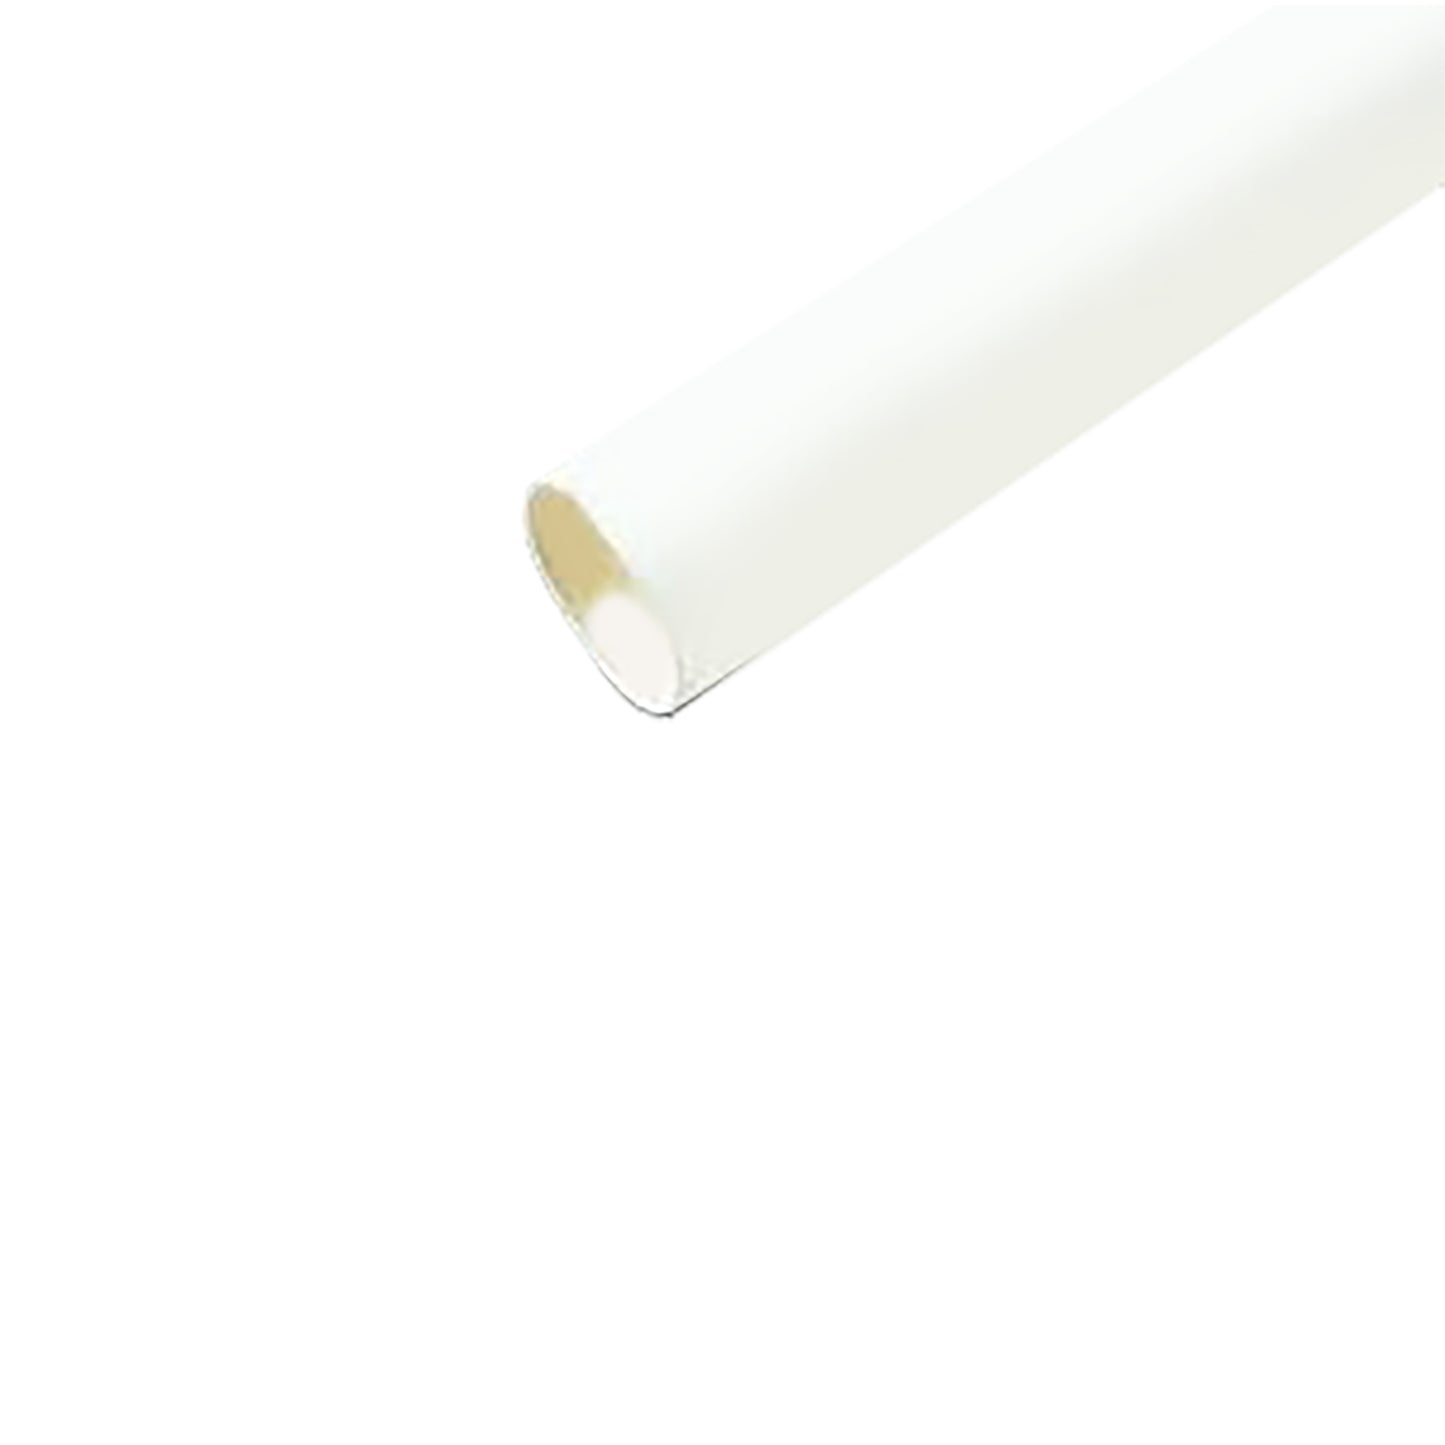 Flexible Thin Single Wall Non-Adhesive Heat Shrink Tubing 2:1 White 3/32" ID - 12" Inch 10 Pack